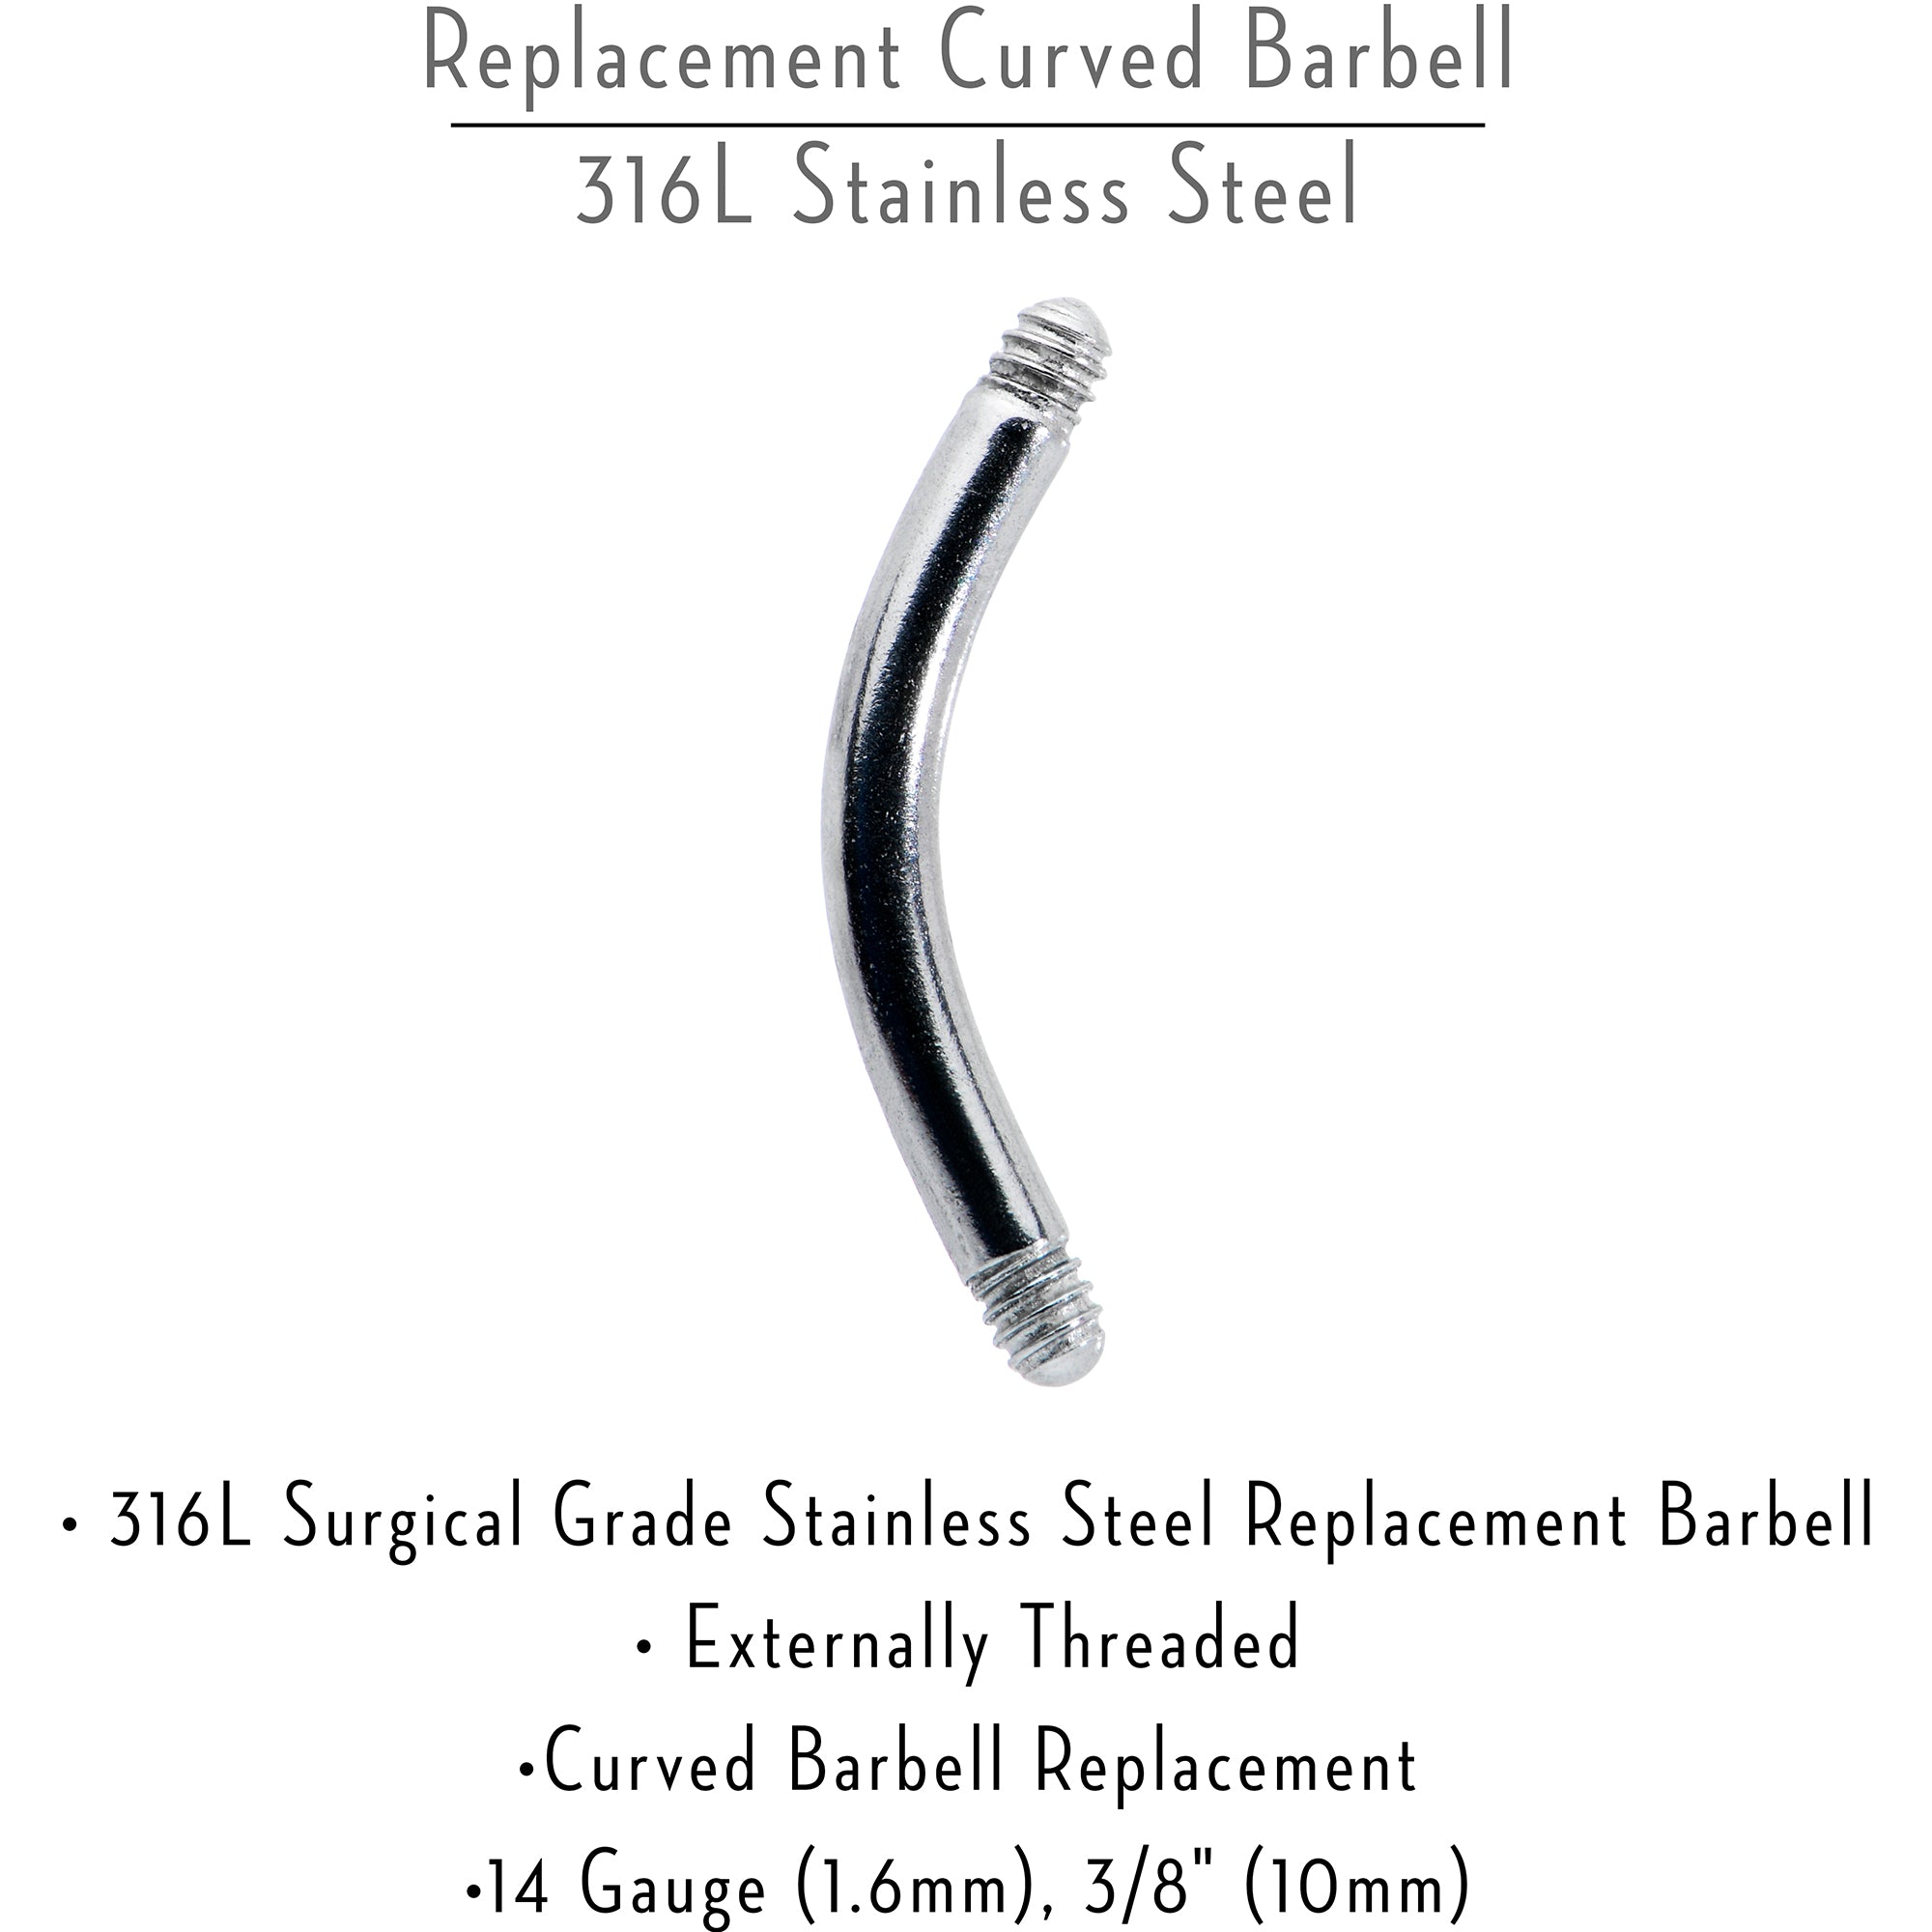 14 Gauge 316l Stainless Steel Replacement Curved Barbell 3/8